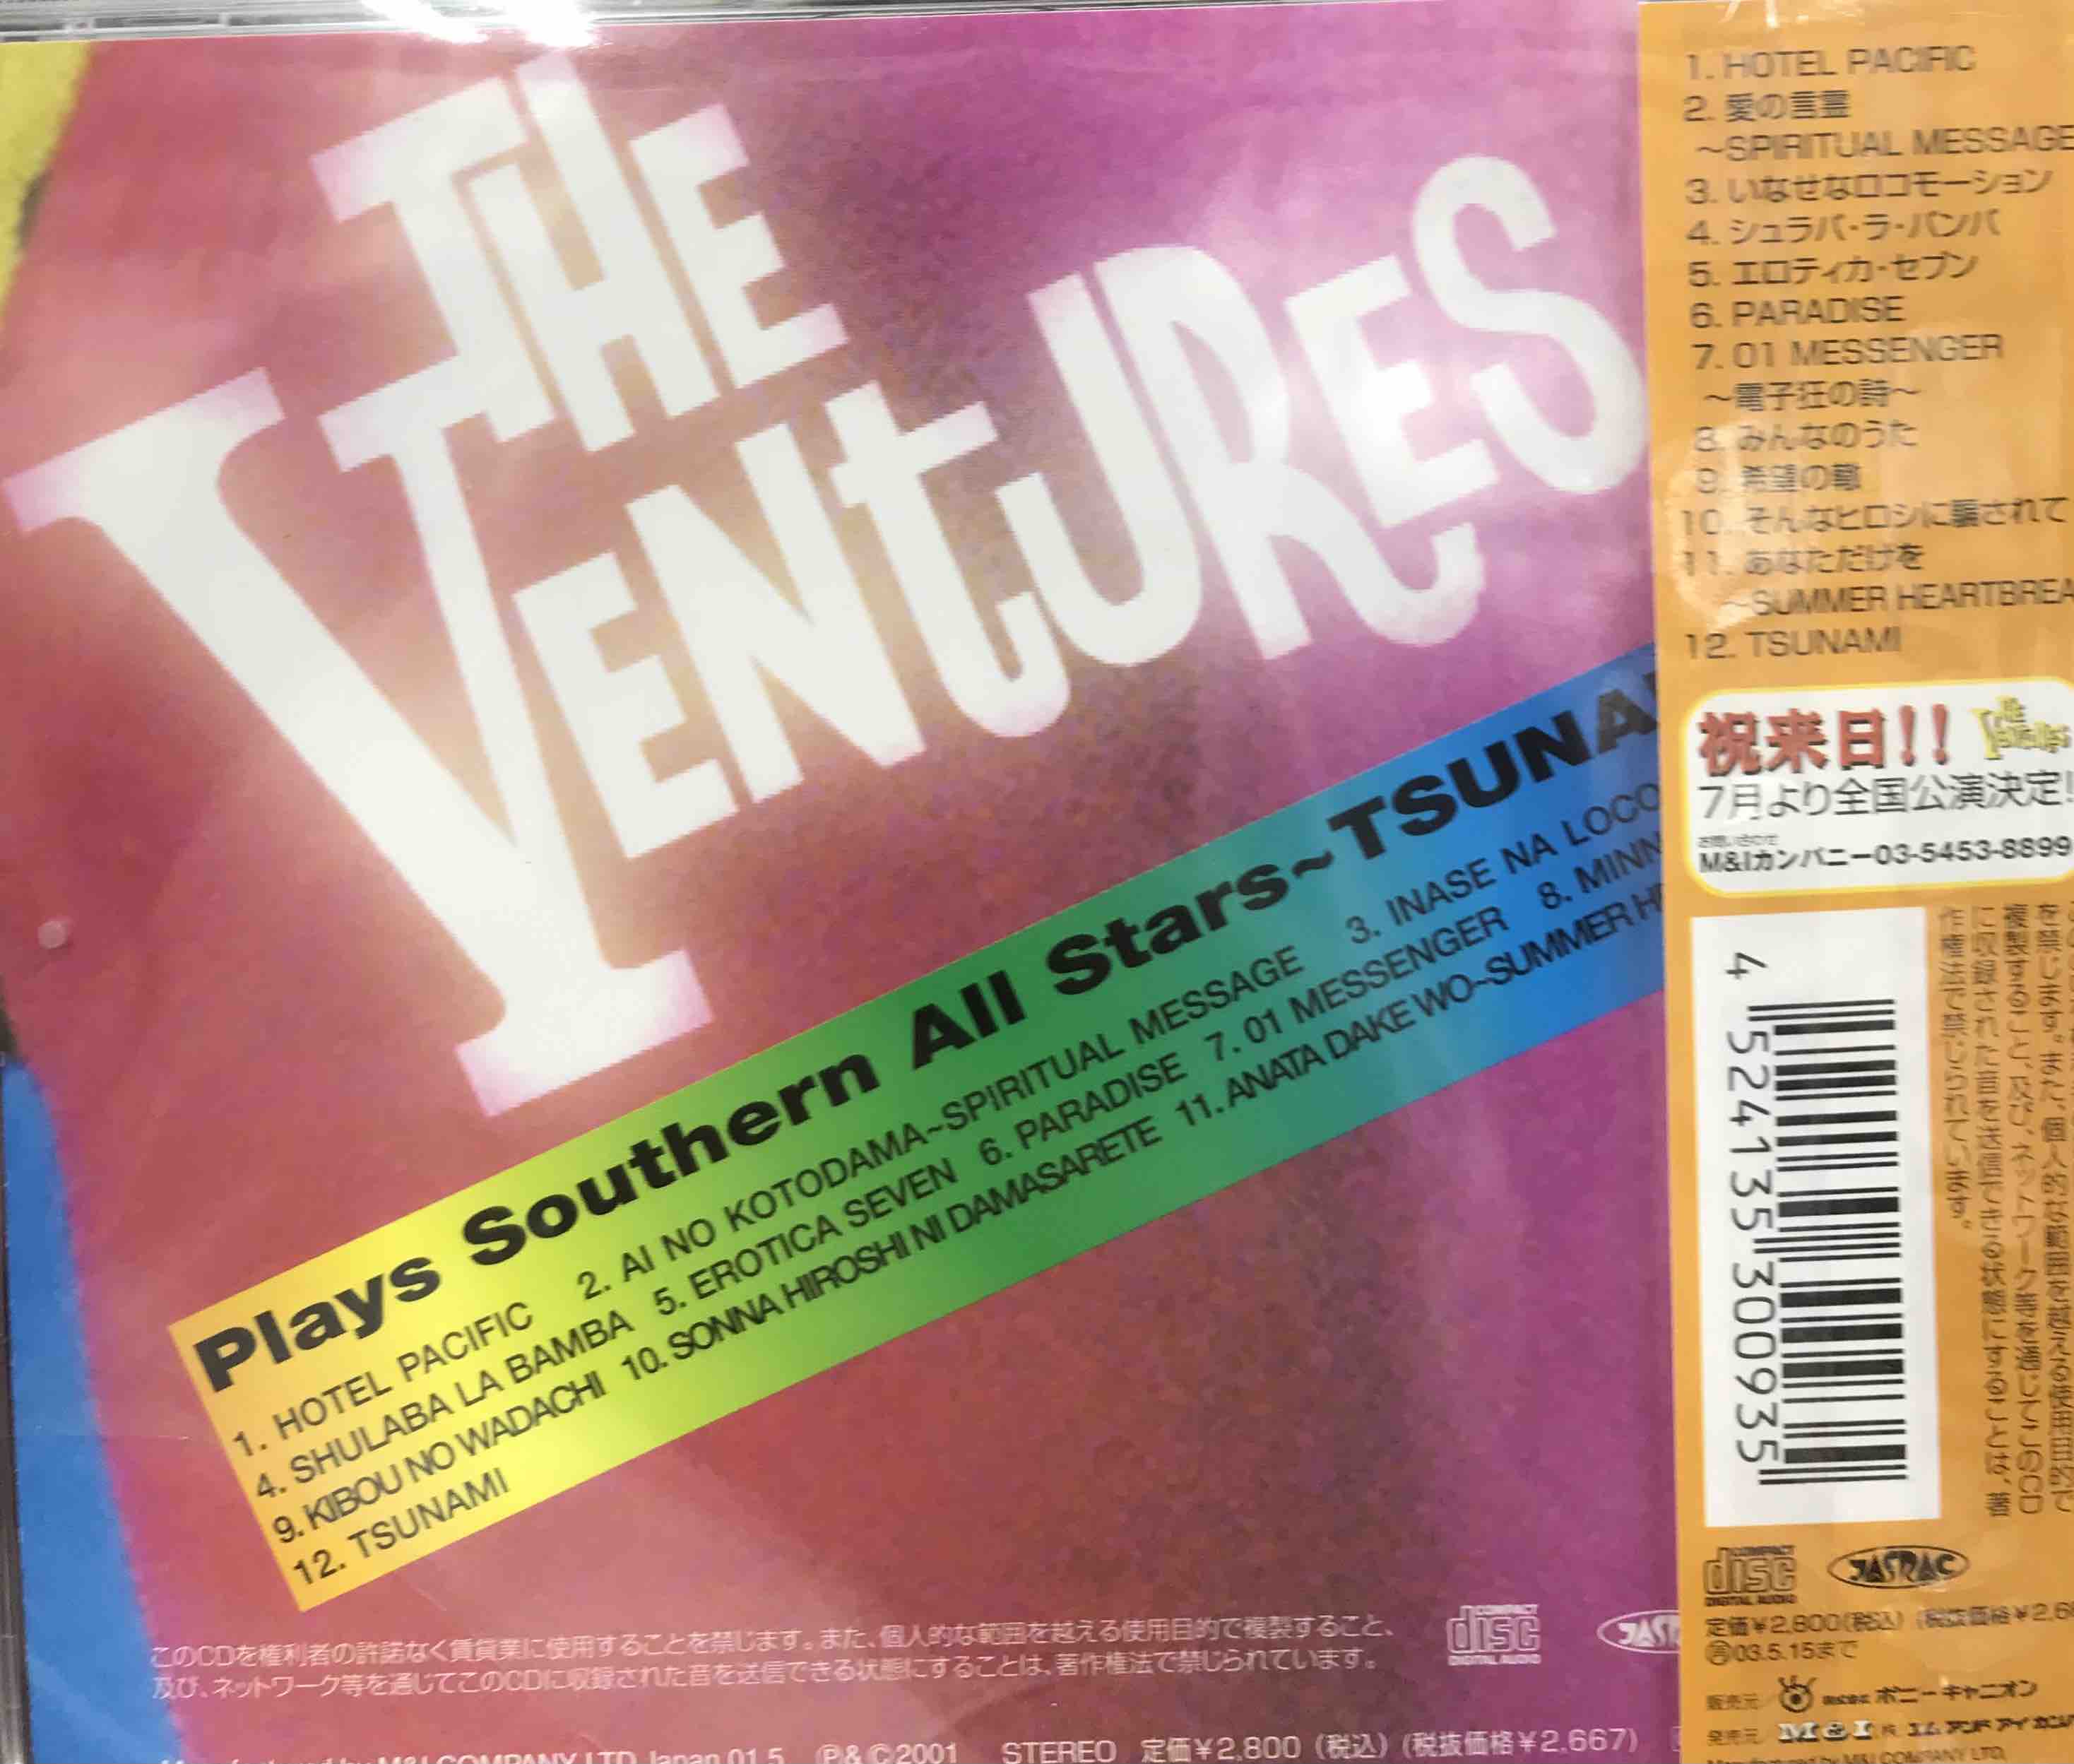 The Ventures ‎– Plays Southern All Stars~TSUNAMI     (Pre-owned)